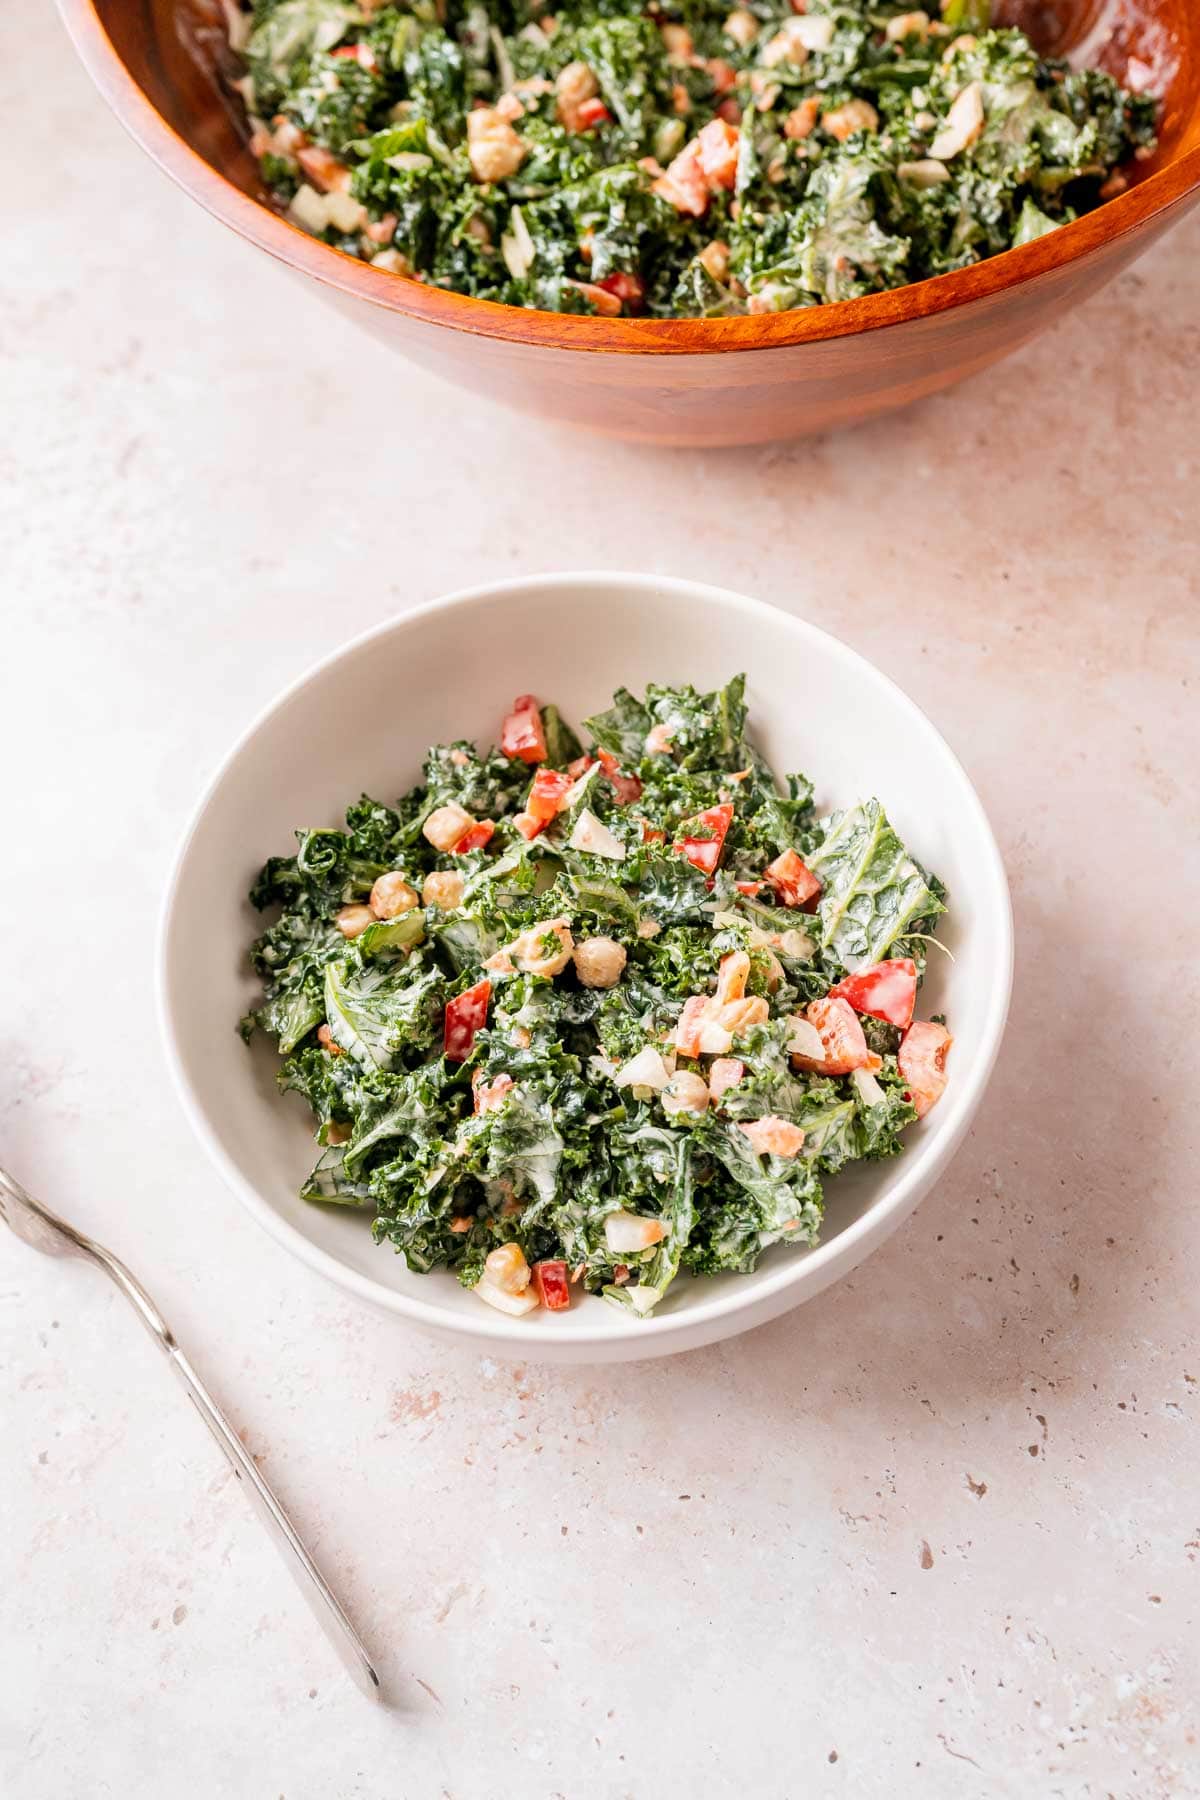 A white bowl of kale salad rests on a tan table next to a silver fork and a large wooden salad bowl.